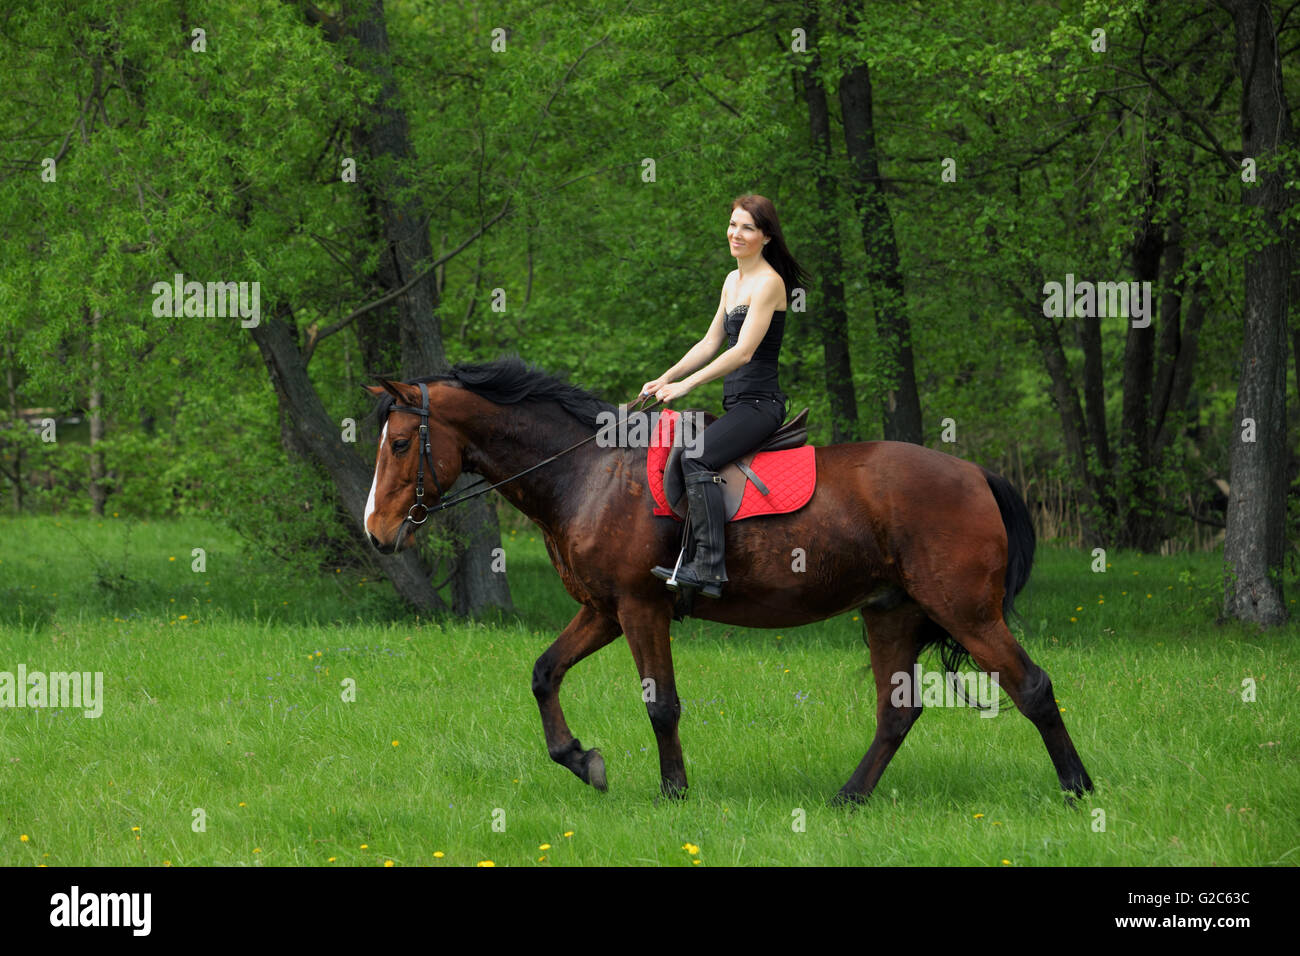 Cheerful young woman and her galloping horse Stock Photo